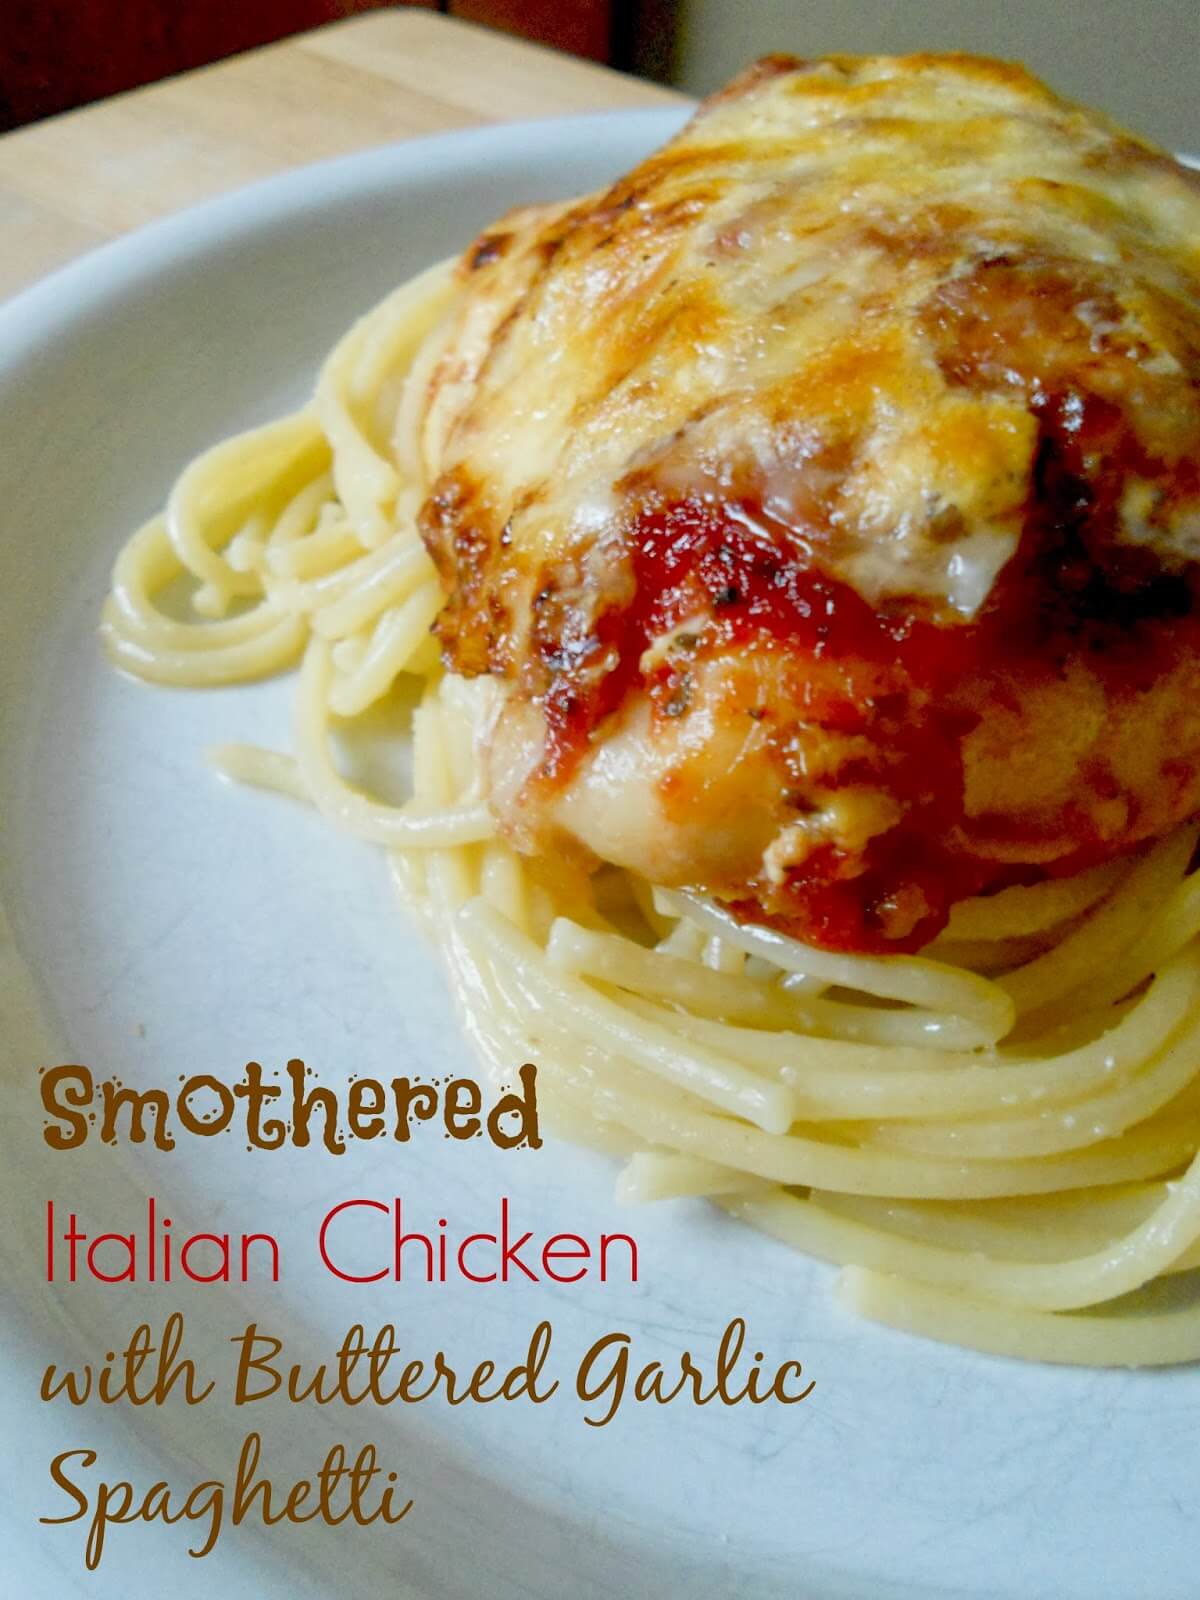 Smothered Italian Chicken with Buttered Garlic Spaghetti from Sweet and Savory Food